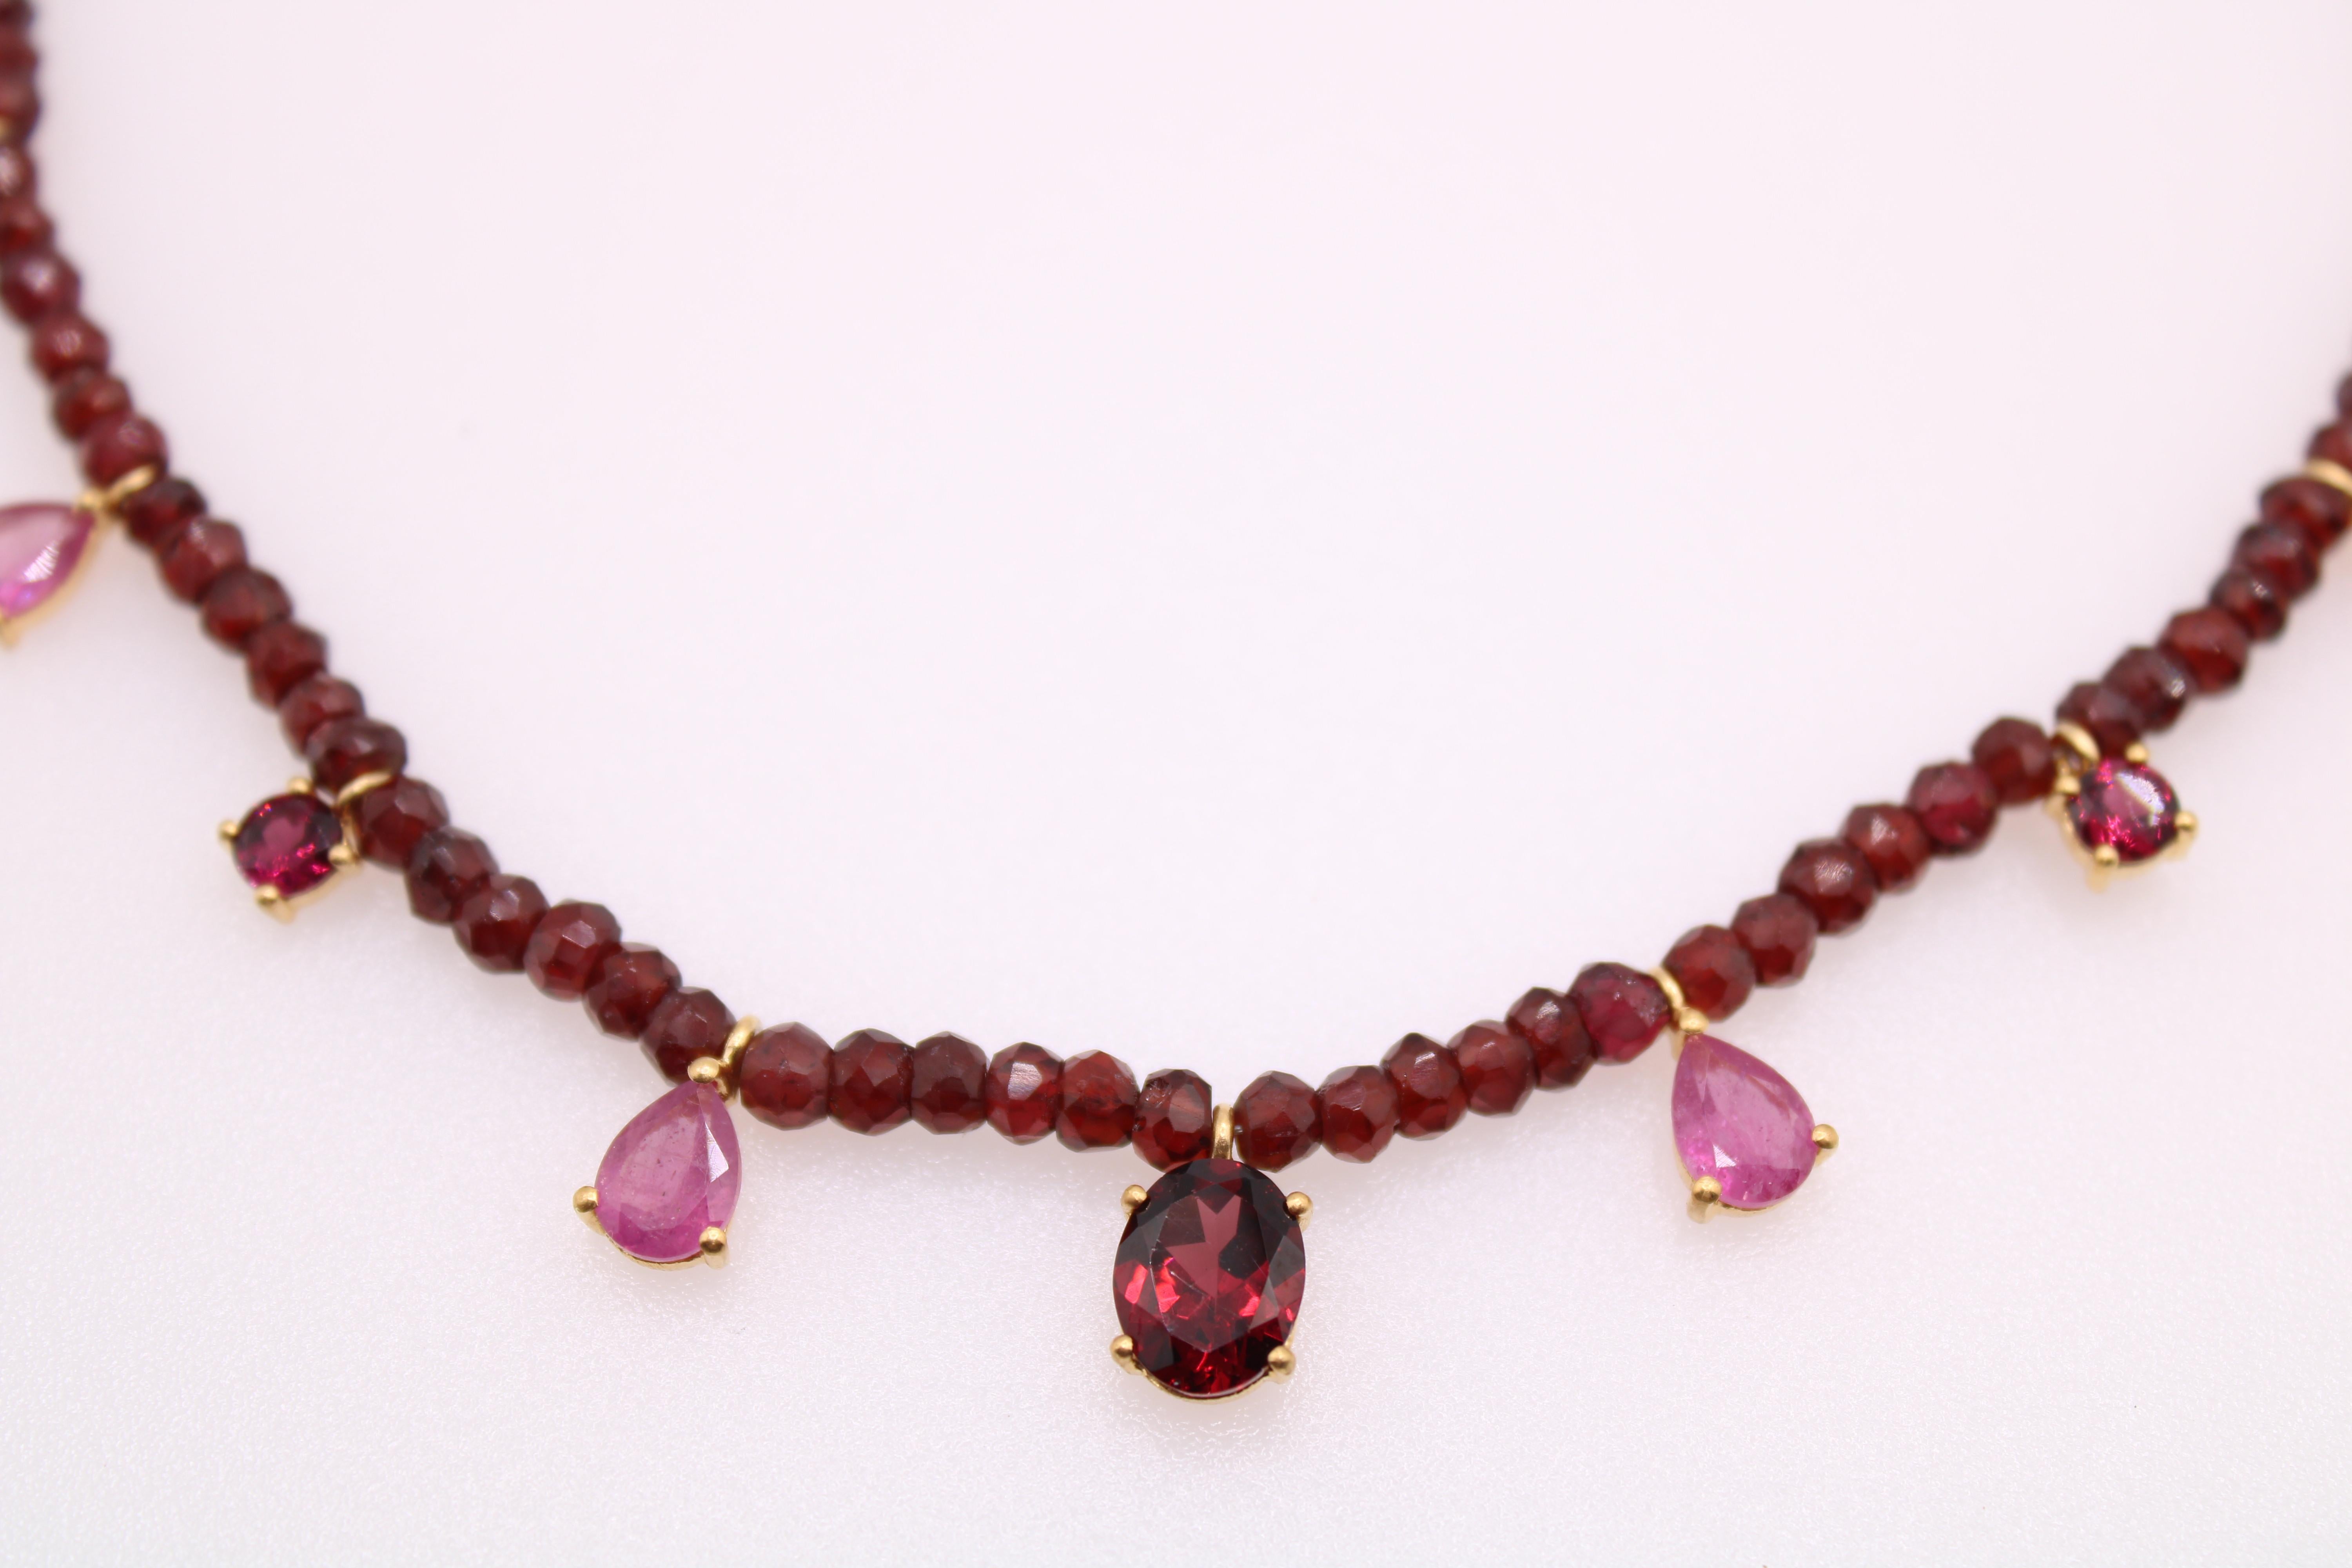 Women's 11.17 Carat Ruby and Garnet Gemstone Beaded Necklace  For Sale